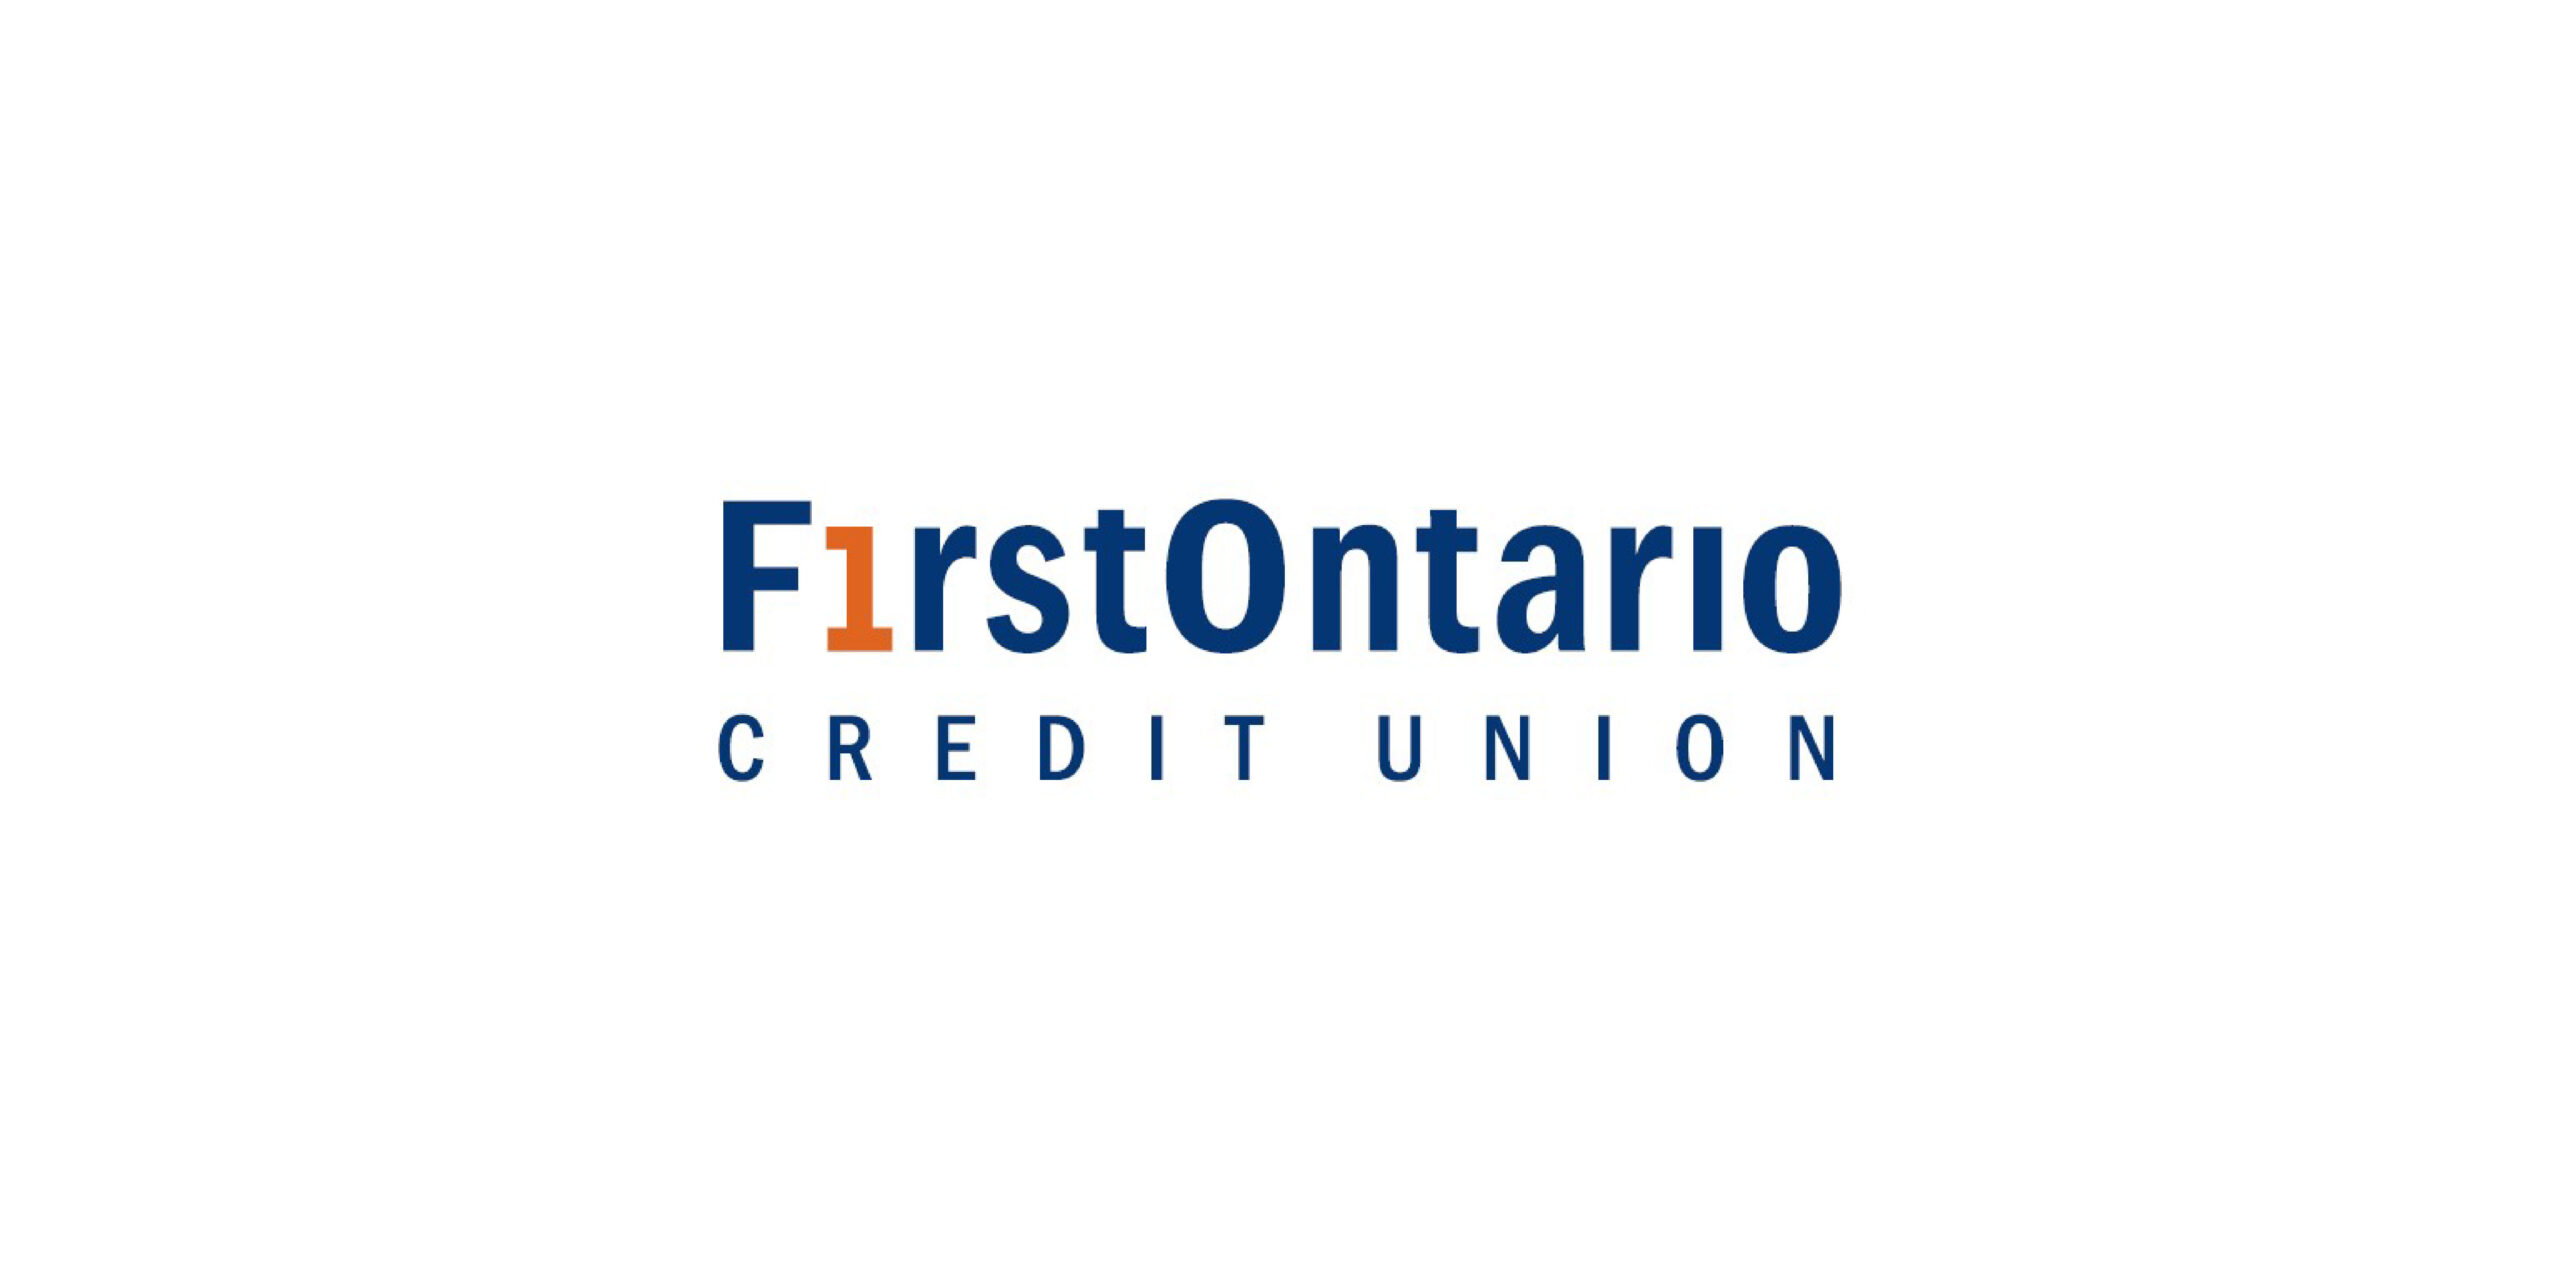 FirstOntario Partners with Flinks and Everlink to Pioneer Open Banking Services